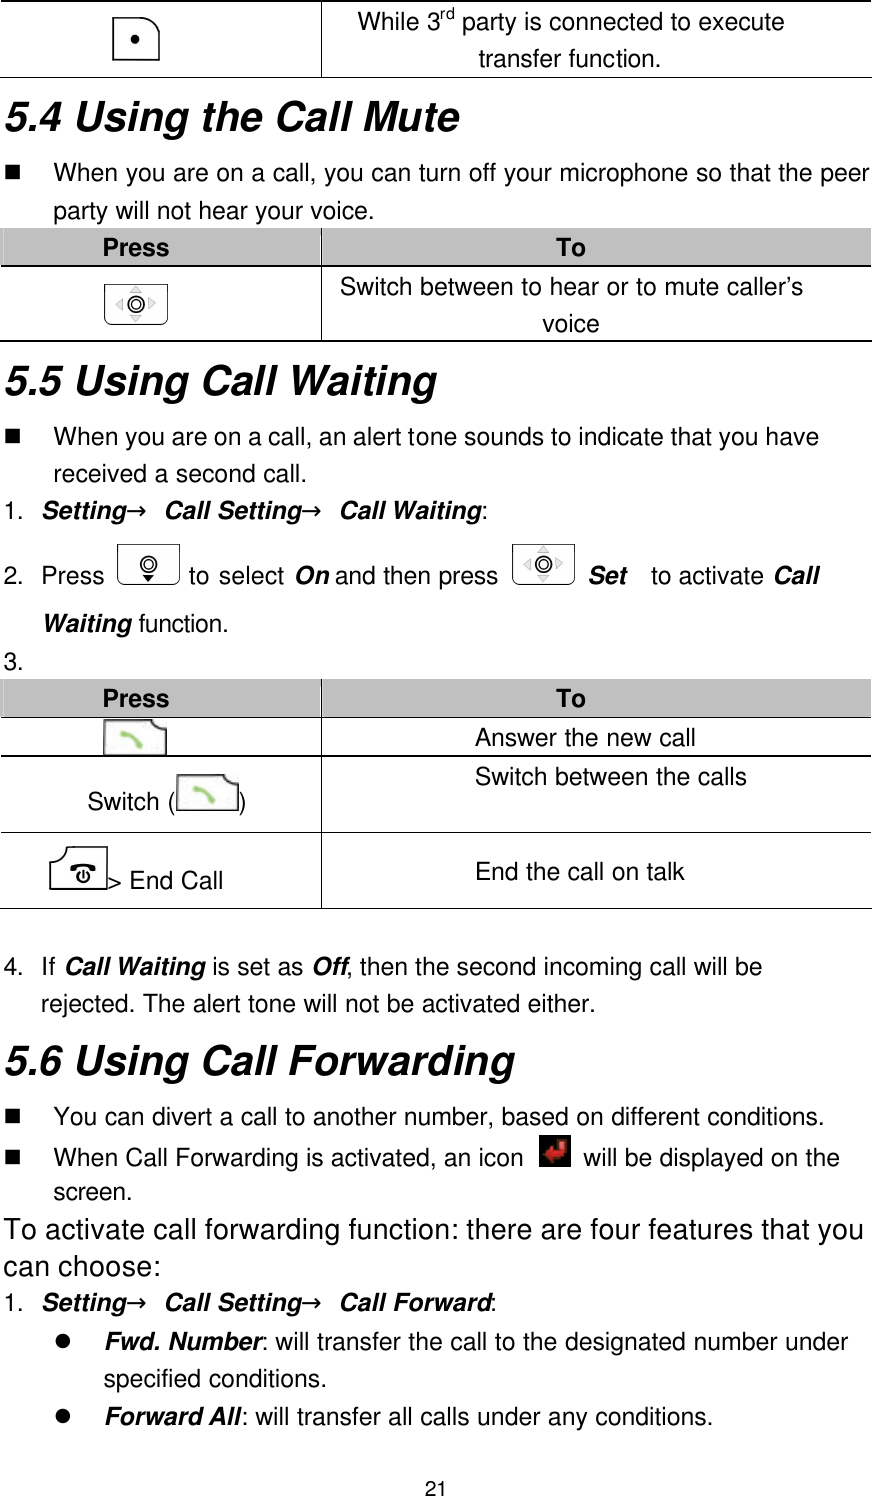  21  While 3rd party is connected to execute transfer function. 5.4 Using the Call Mute n When you are on a call, you can turn off your microphone so that the peer party will not hear your voice. Press To  Switch between to hear or to mute caller’s voice 5.5 Using Call Waiting n When you are on a call, an alert tone sounds to indicate that you have received a second call.   1. Setting→ Call Setting→ Call Waiting: 2. Press   to select On and then press   Set  to activate Call Waiting function. 3.   Press To     Answer the new call      Switch ( )   Switch between the calls  &gt; End Call End the call on talk  4. If Call Waiting is set as Off, then the second incoming call will be rejected. The alert tone will not be activated either. 5.6 Using Call Forwarding n You can divert a call to another number, based on different conditions. n When Call Forwarding is activated, an icon   will be displayed on the screen. To activate call forwarding function: there are four features that you can choose: 1. Setting→ Call Setting→ Call Forward: l Fwd. Number: will transfer the call to the designated number under specified conditions. l Forward All: will transfer all calls under any conditions. 